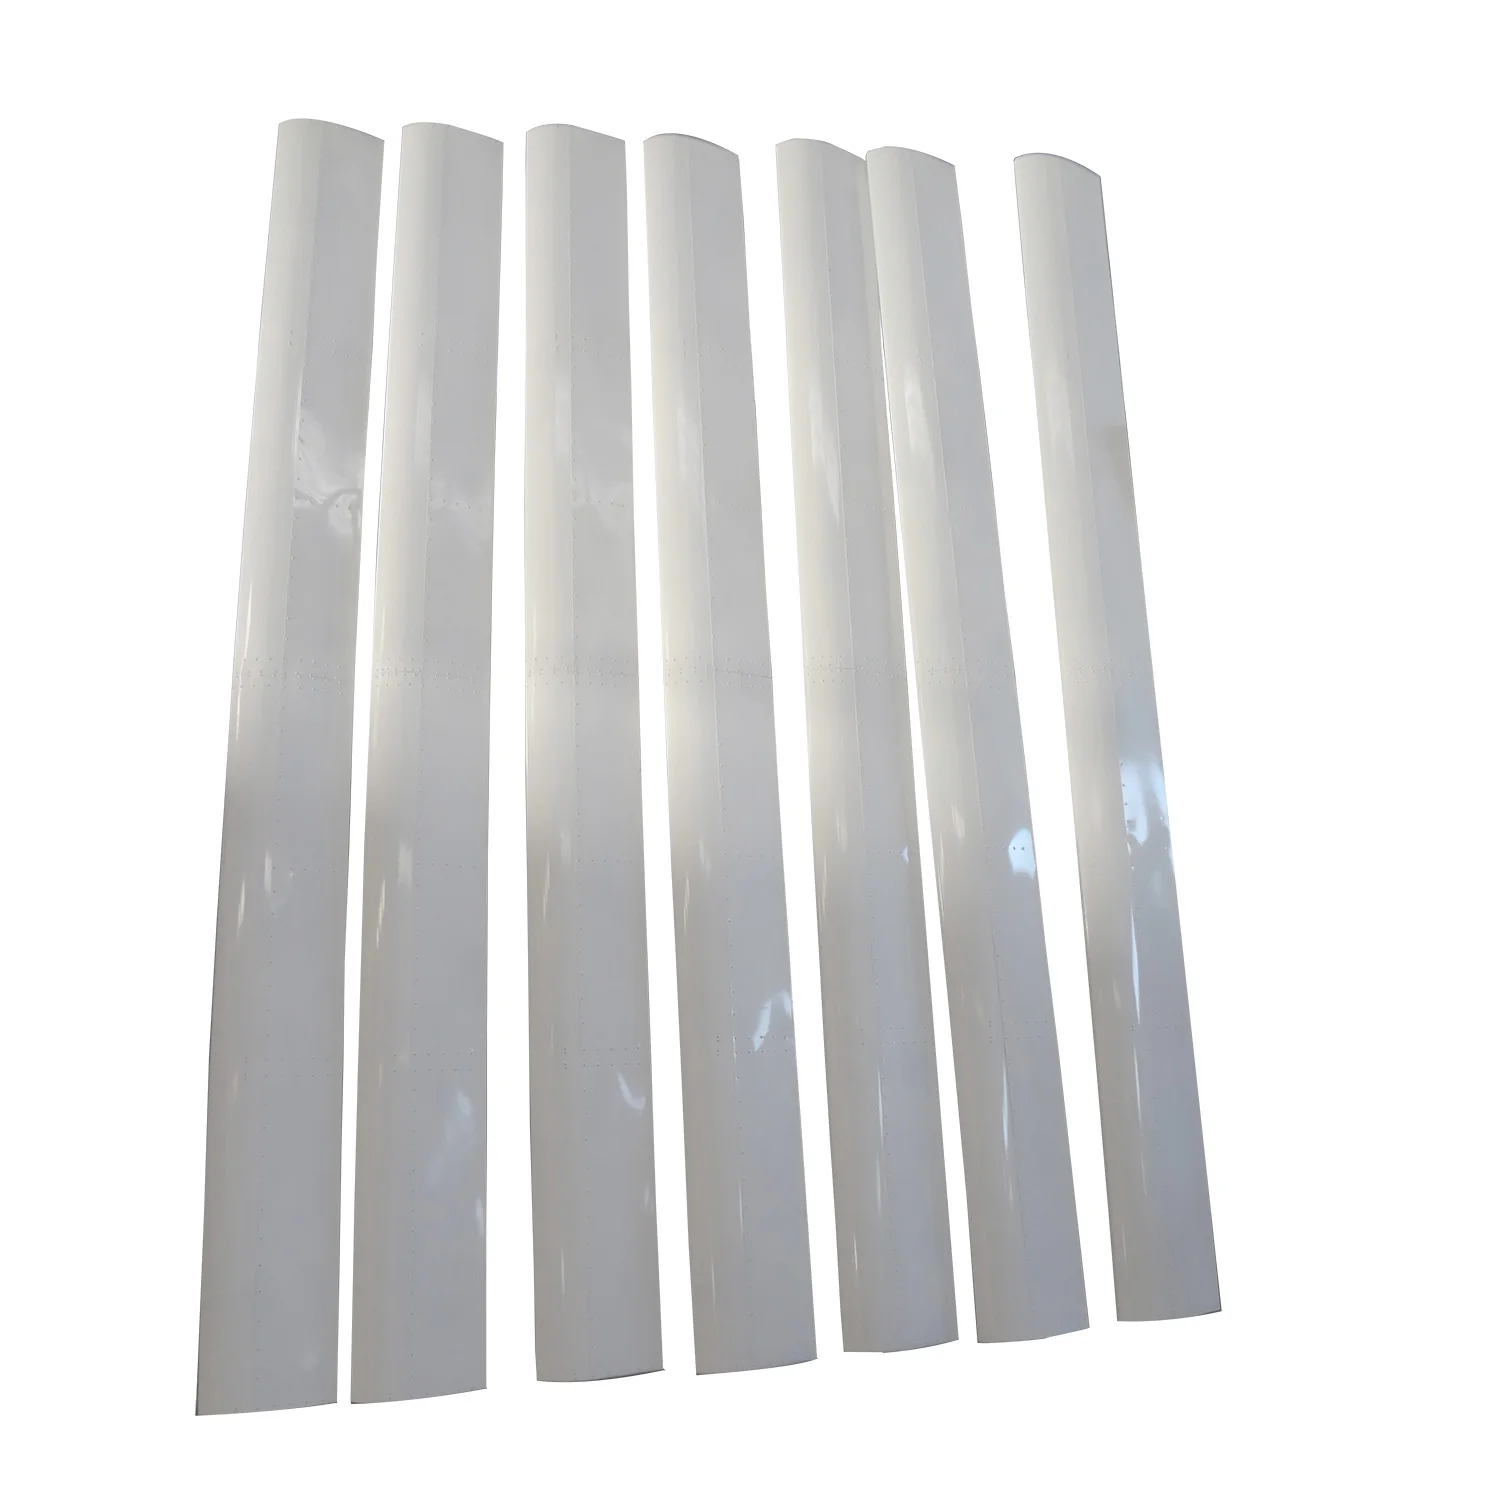 H-type vertical axis wind turbine blade for sale